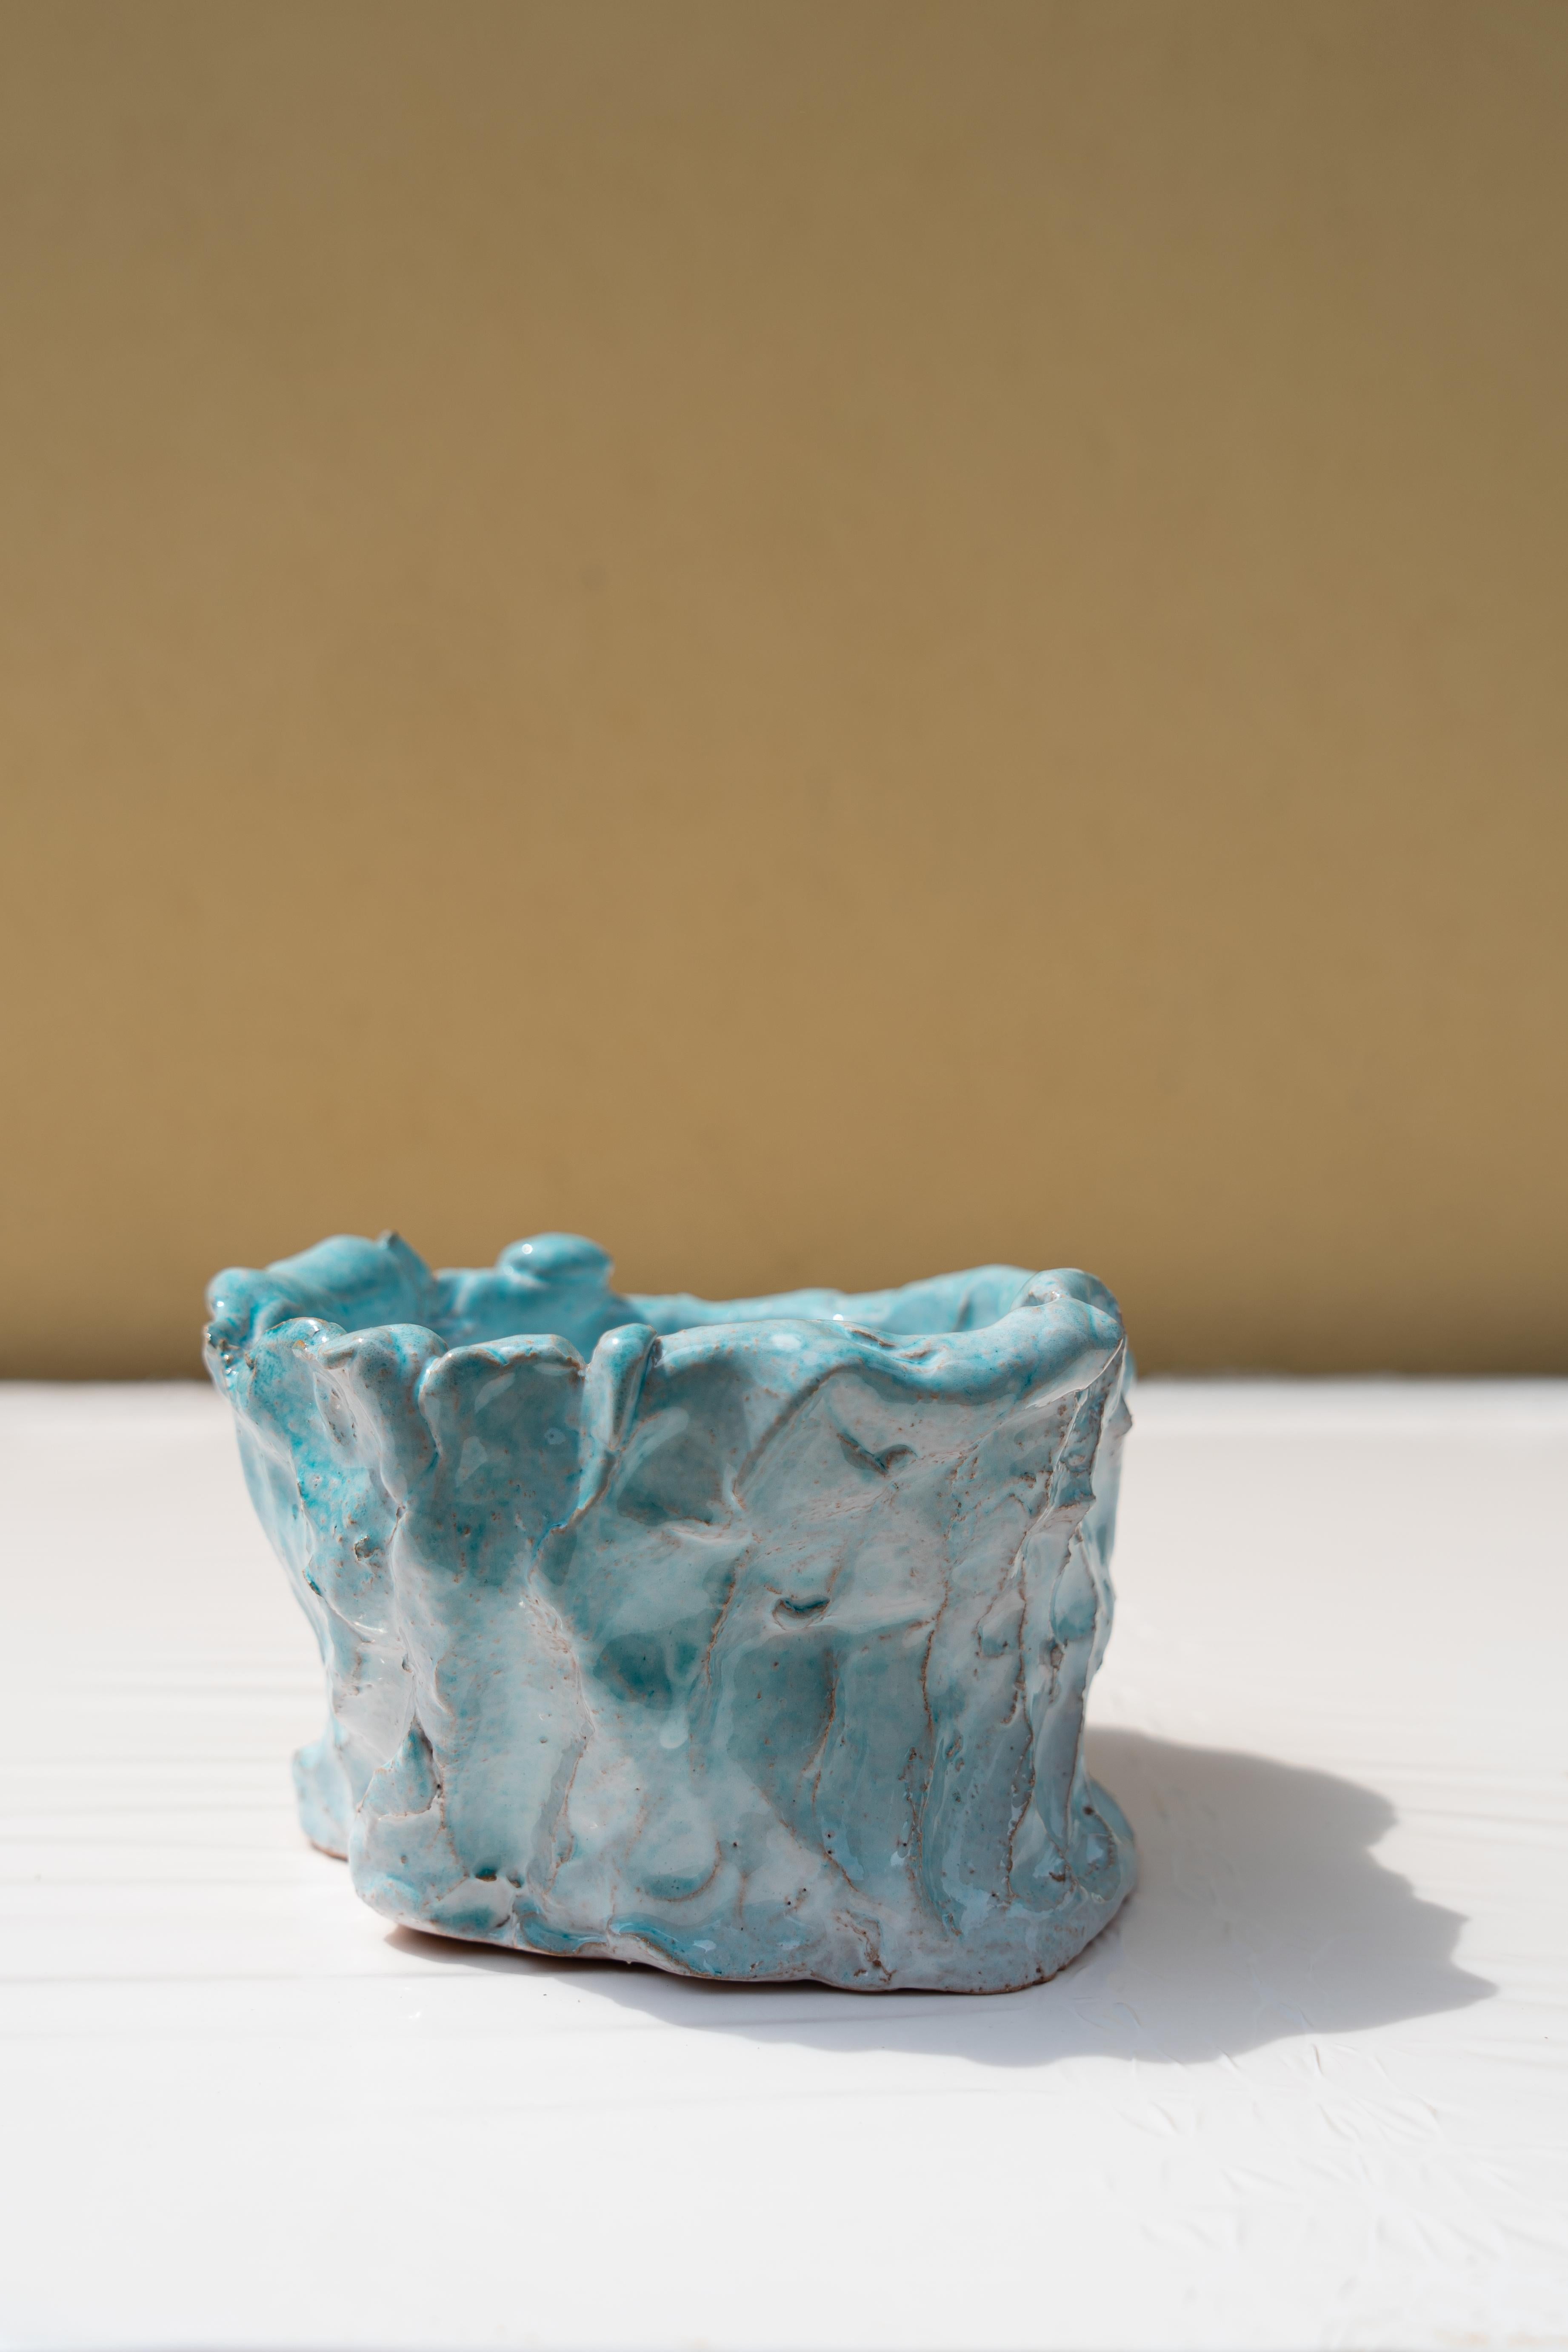 Light blue vase by Daniele Giannetti
Dimensions: Ø 16 x H 10 cm.
Materials: Glazed terracotta. 

All pieces are made in terracotta from Montelupo, only fired once, then colored by Daniele Giannetti with a white acrylic base, and then a mixture